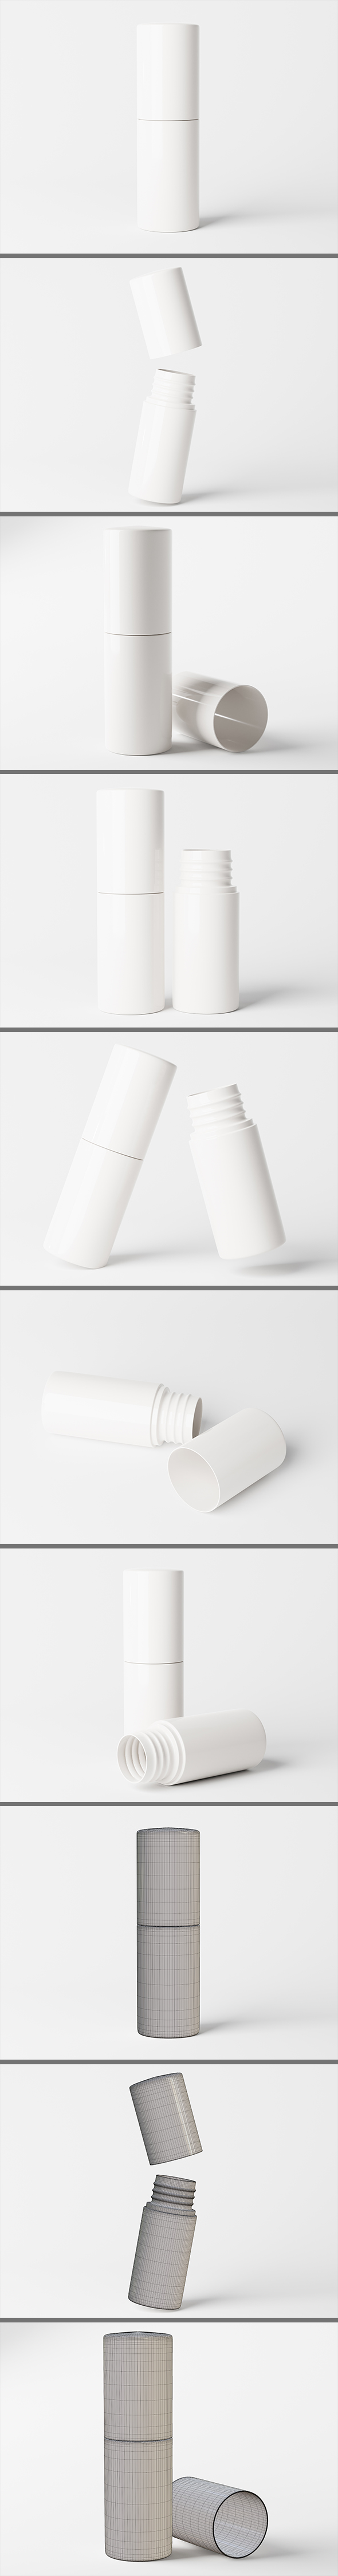 [DOWNLOAD]Cosmetic Product Bottle 3D Model